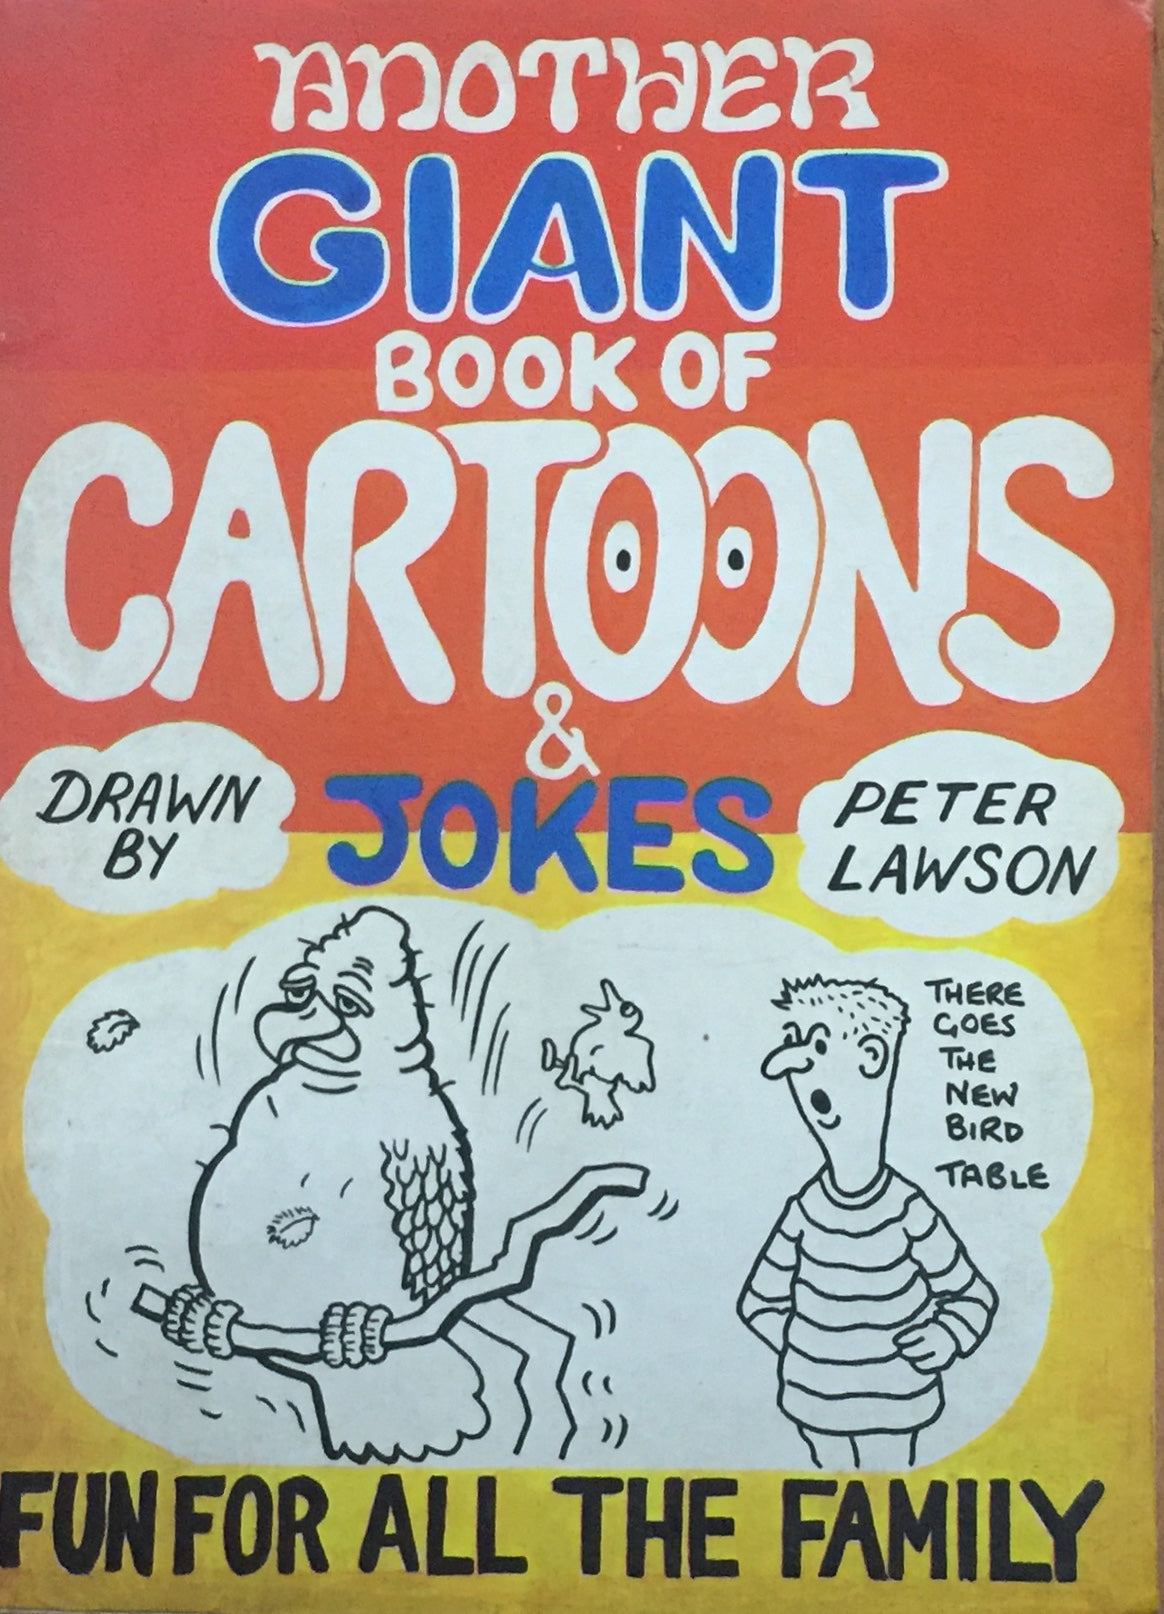 Another Giant Book of Cartoons and Jokes by Peter Lawson (D)